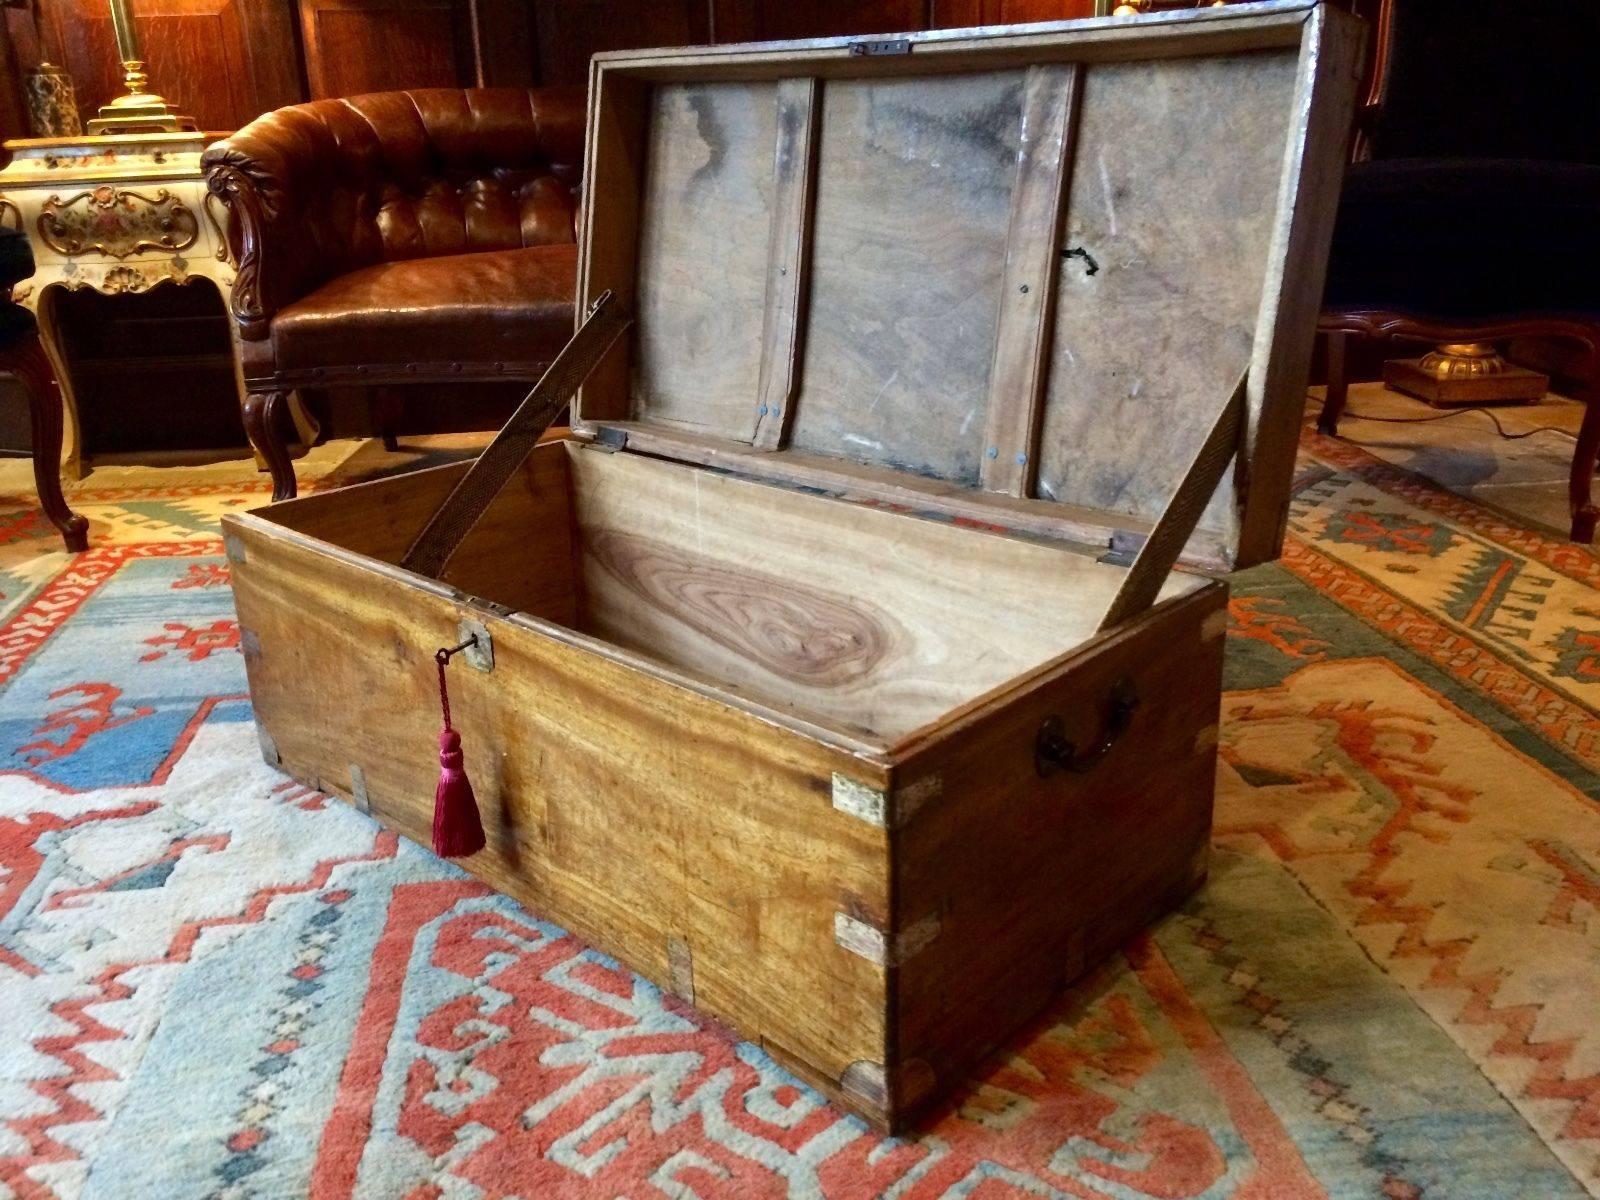 A fabulous antique Victorian camphor wood campaign chest, the chest is offered in super original condition, brass bound, original brass name plate to top with heavy brass carry handles to the sides, comes with one working key and tassel.